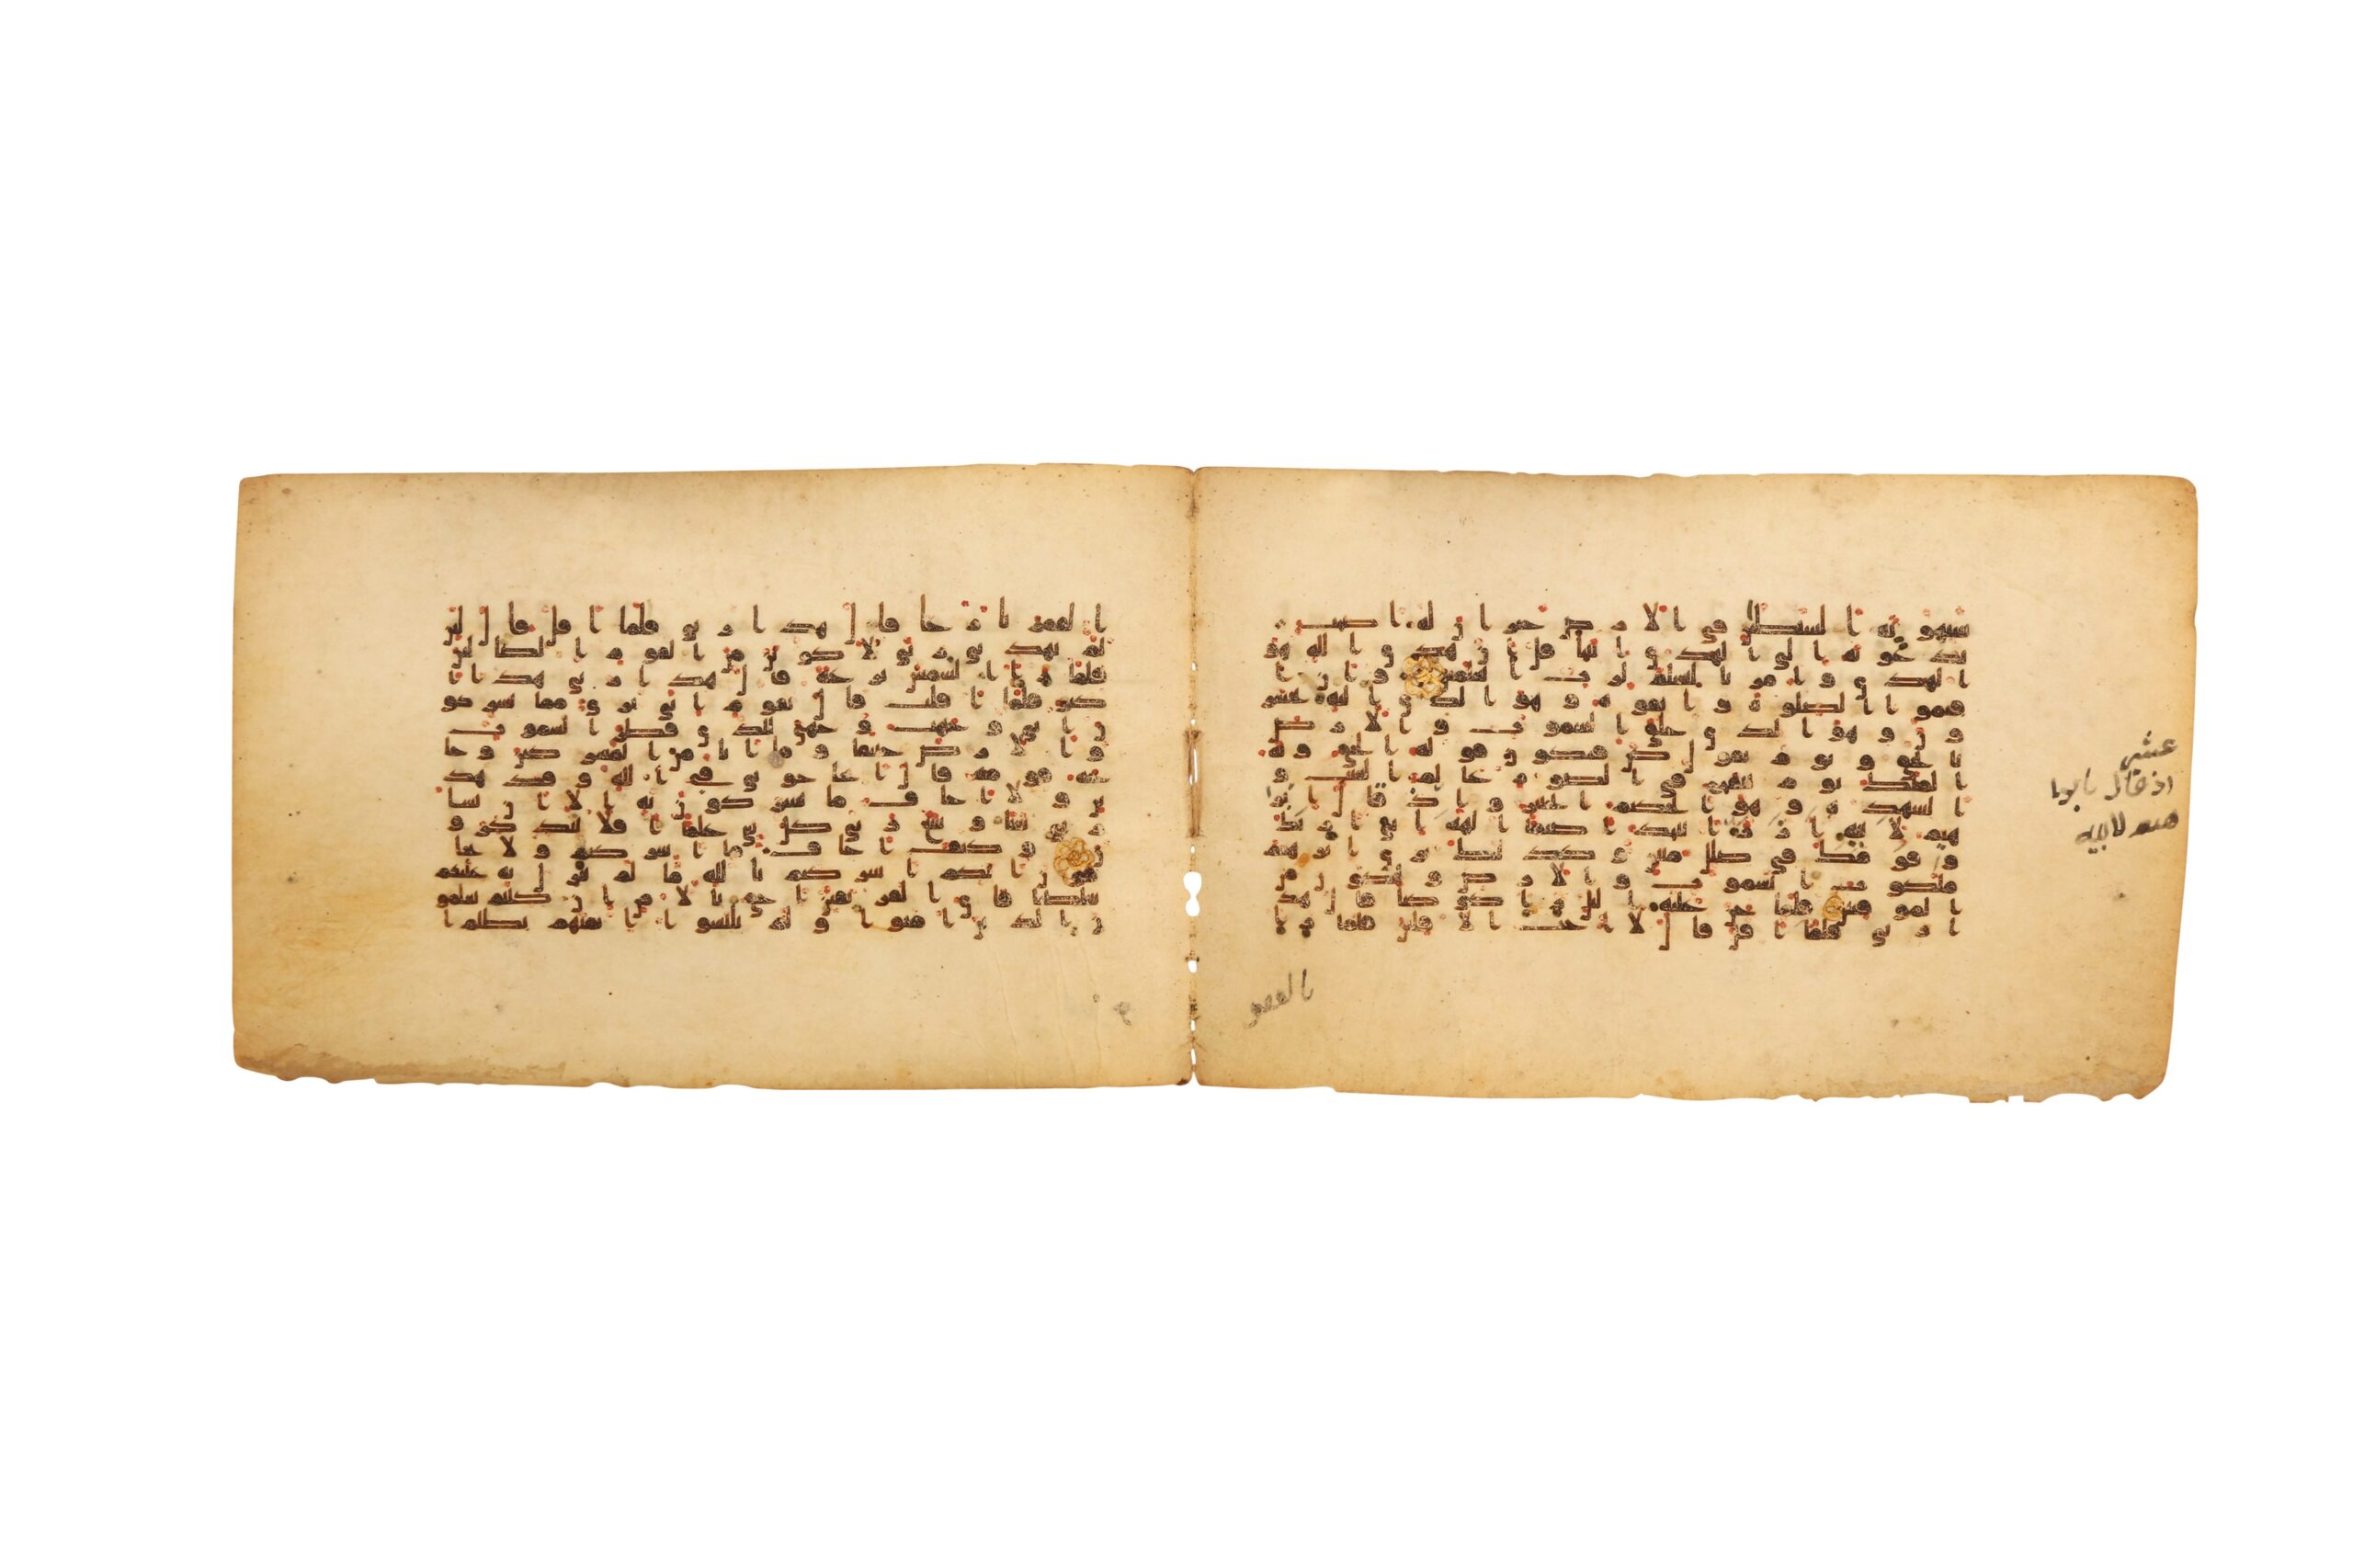 Lot 454. A SMALL-SIZED KUFIC QUR'AN BIFOLIO Near East or North Africa, 9th - 10th century. Sold for £12,500